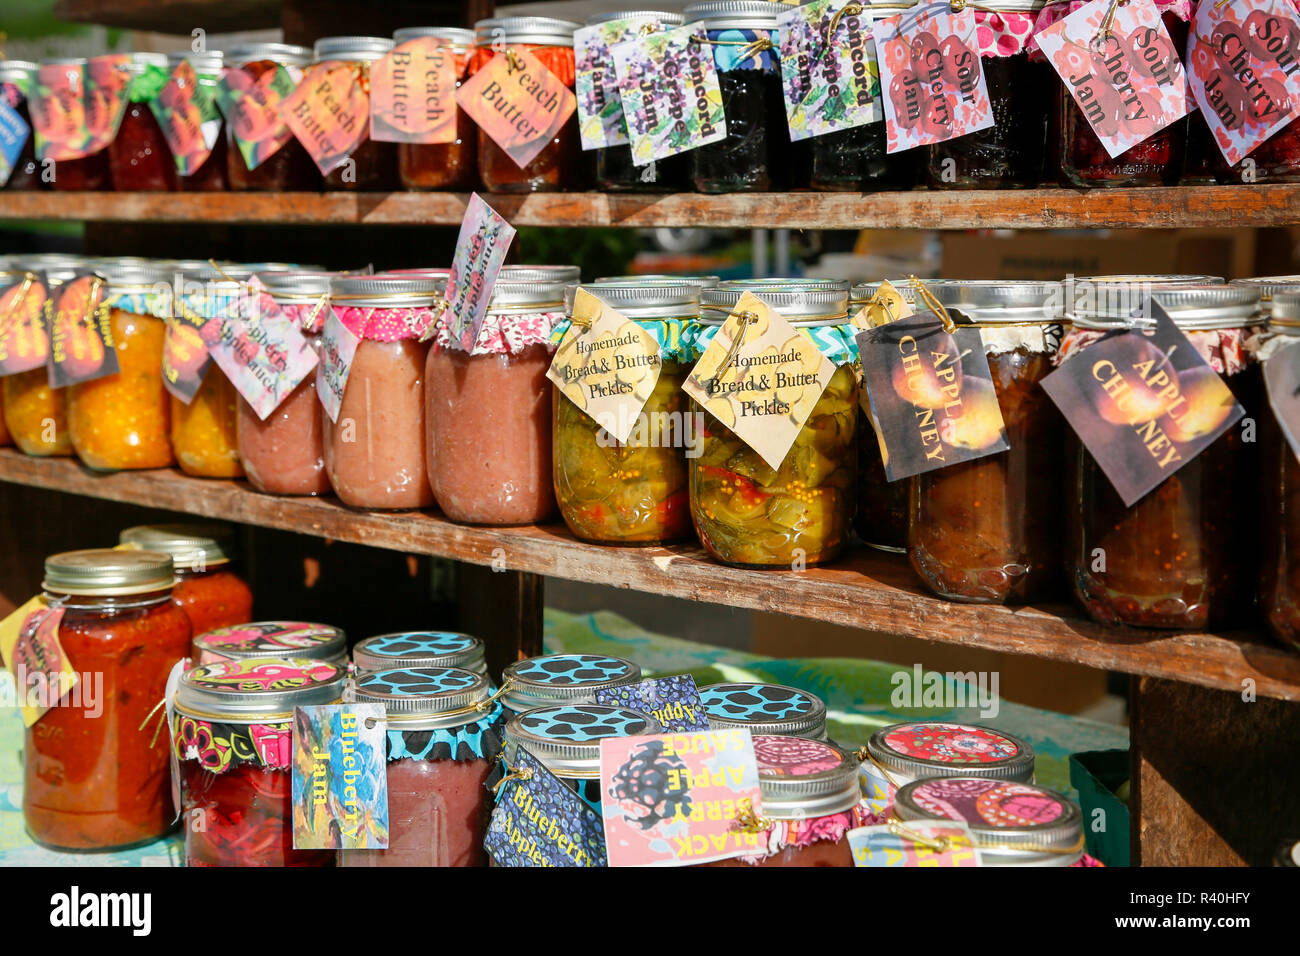 Homemade pickled vegetables and canned fruit at a farmers market, Woodstock, New York, USA. Stock Photo